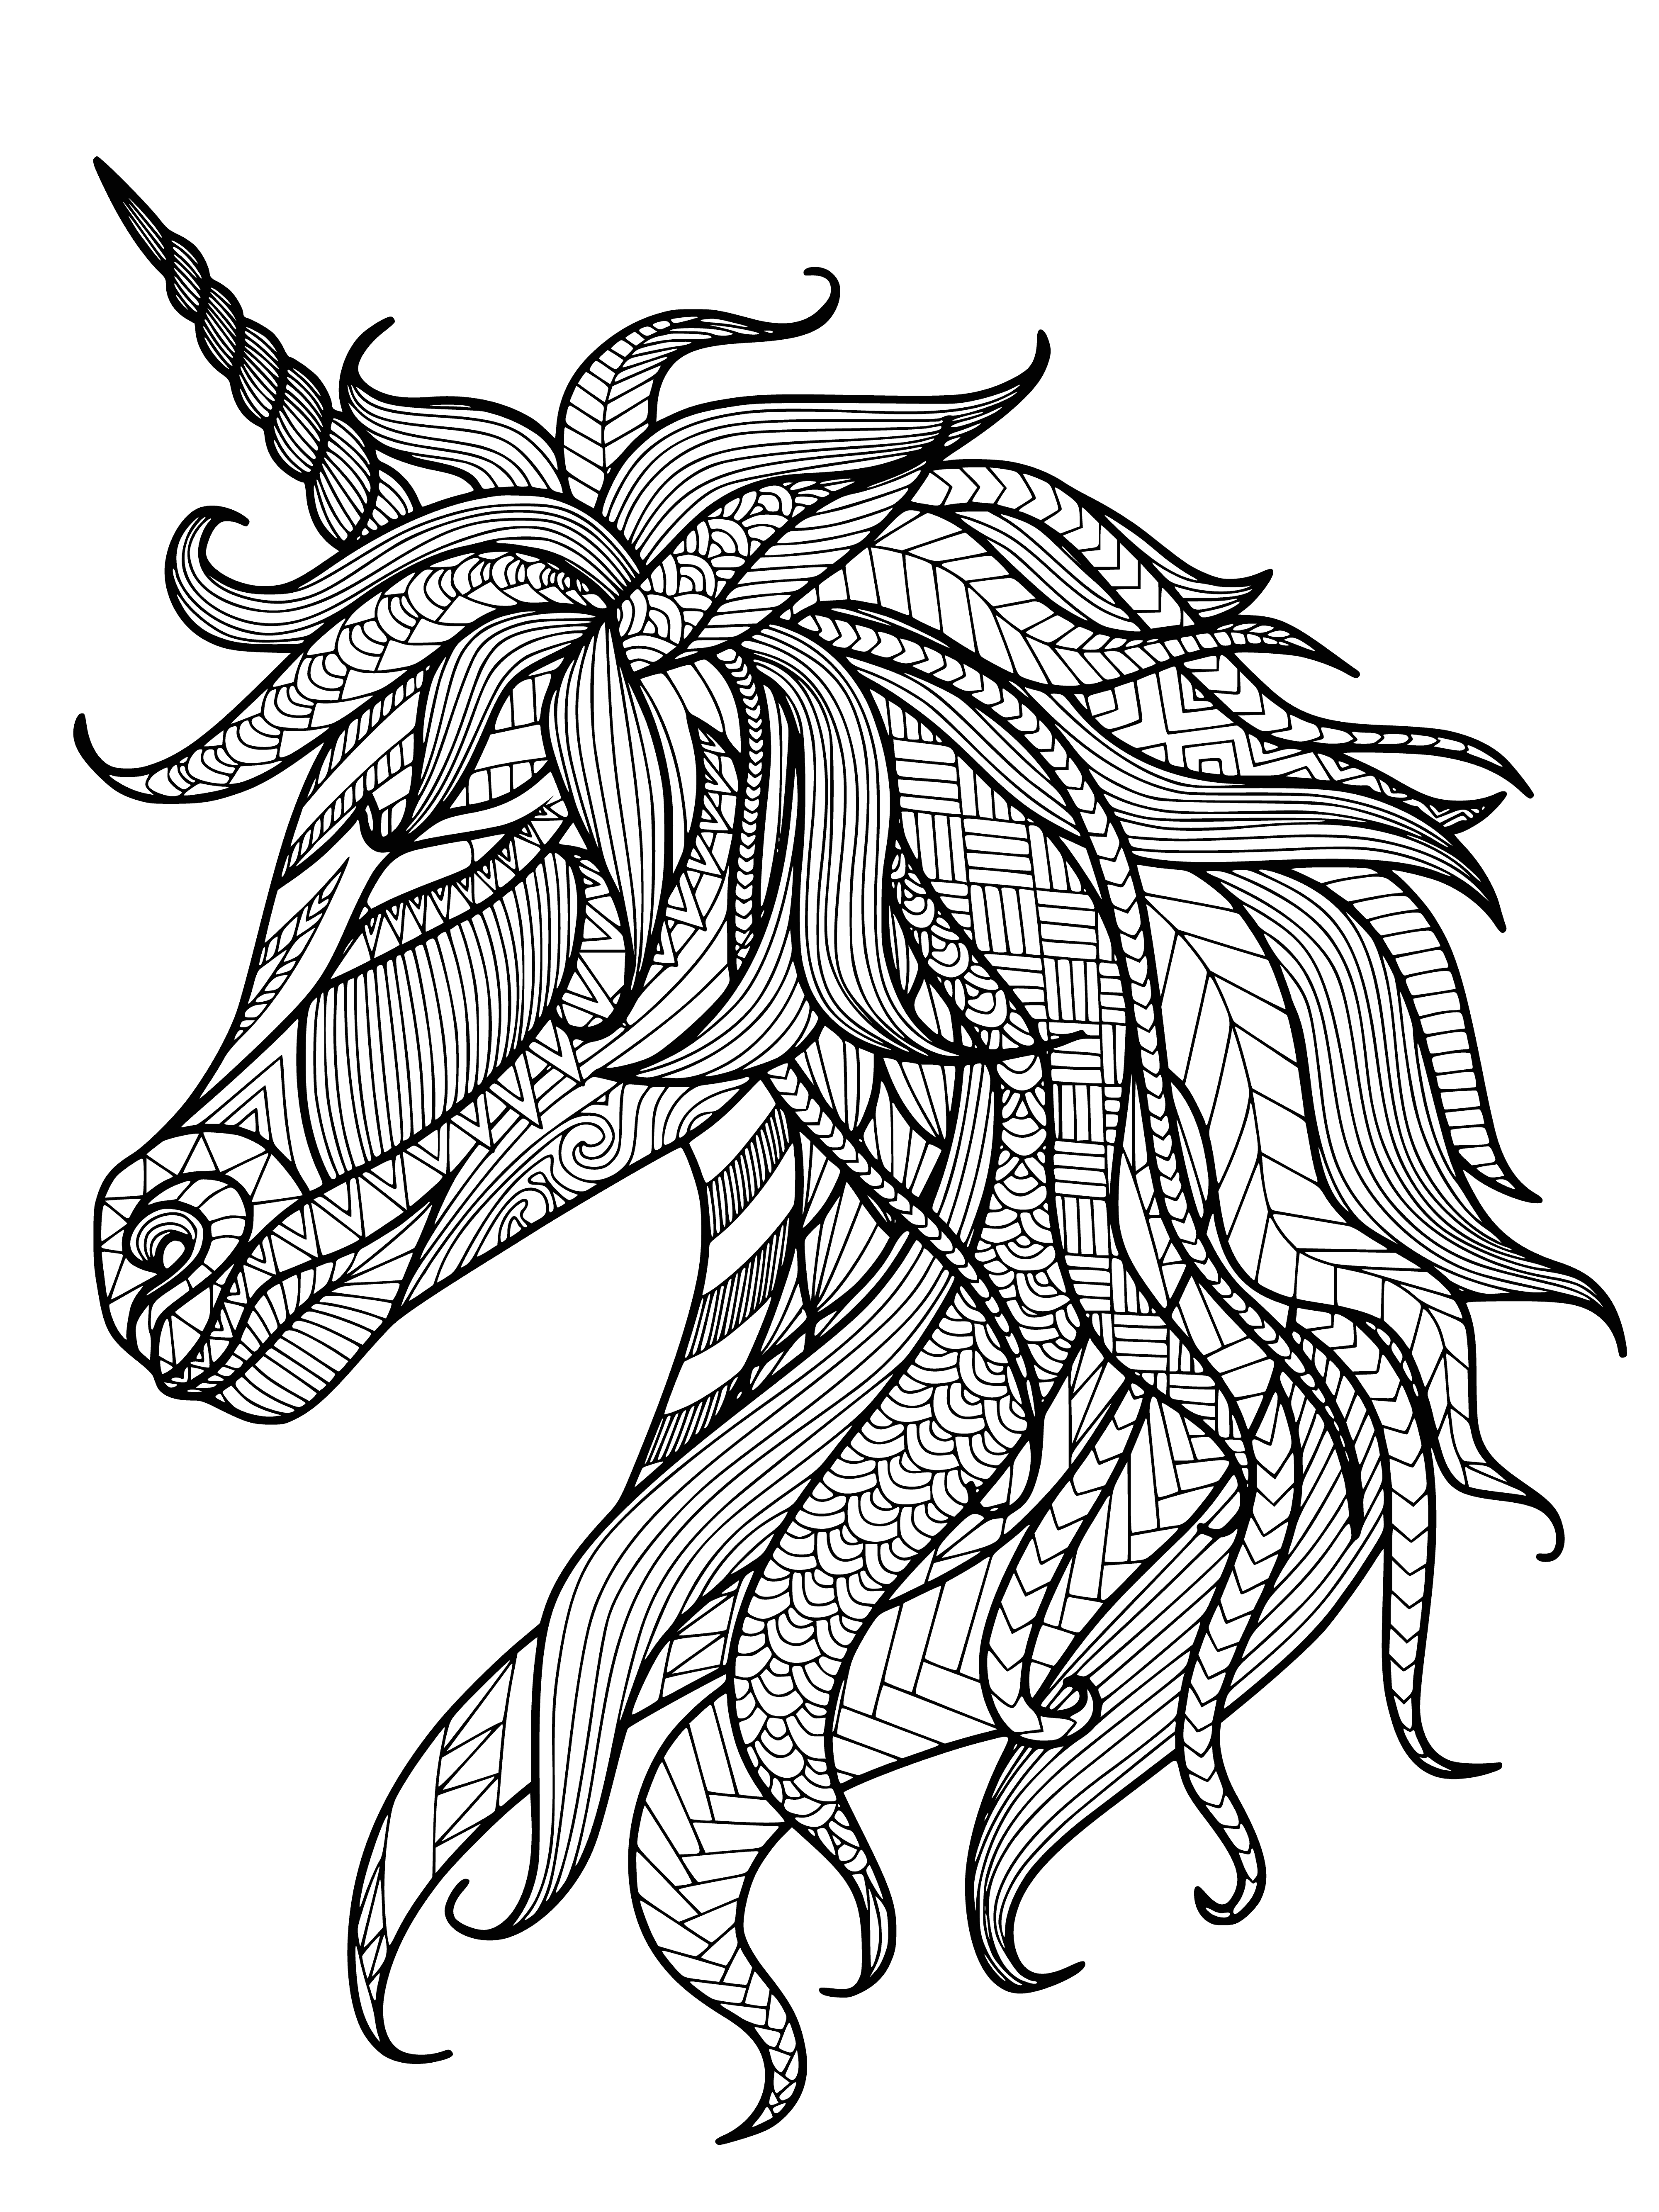 coloring page: Color a adorable unicorn standing on a patch of grass with flowers and a long, spiraling horn.